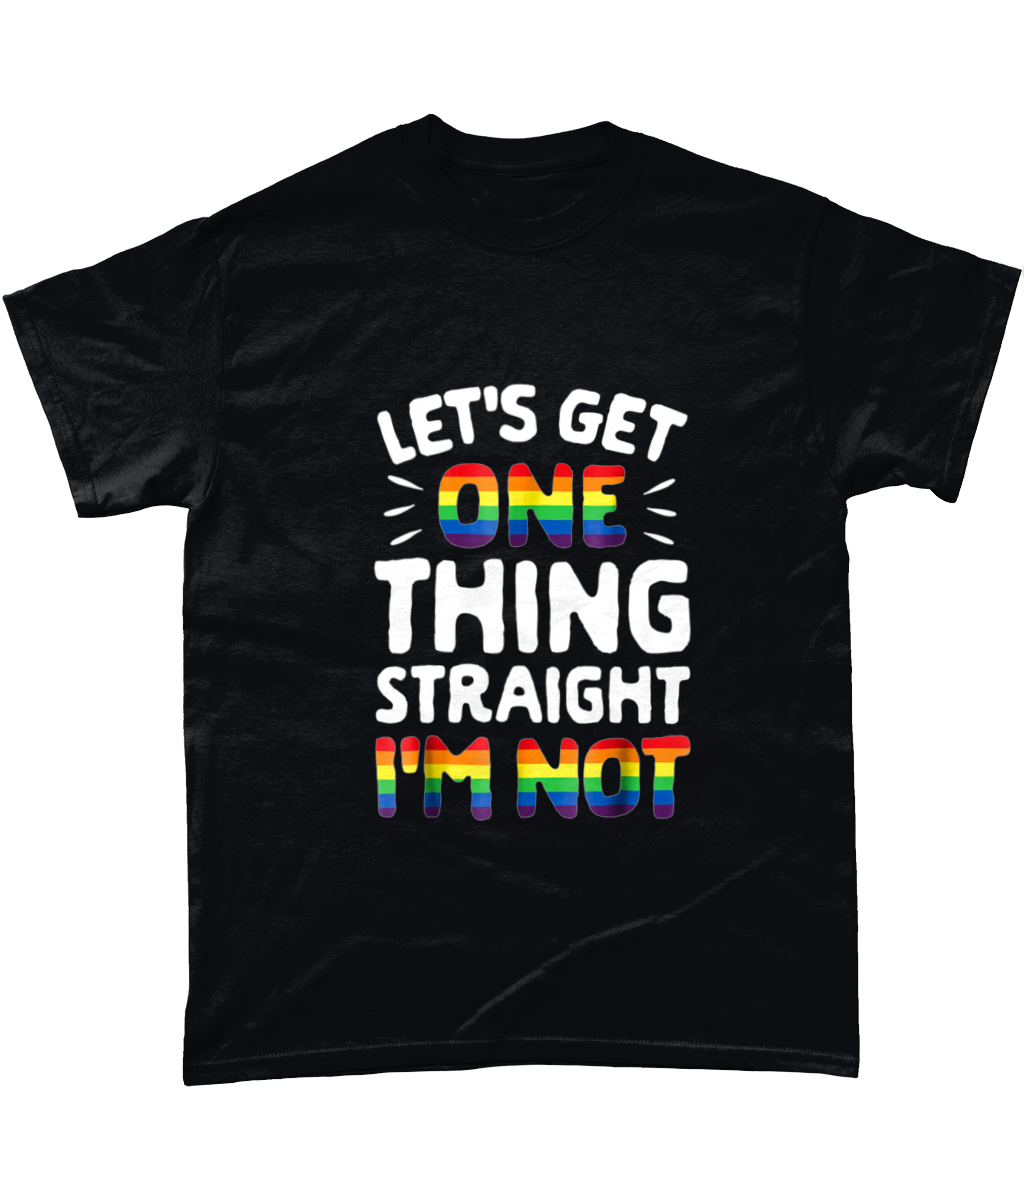 Let's get one thing straight I'm not gay pride LGBTQIA Cotton T-Shirt